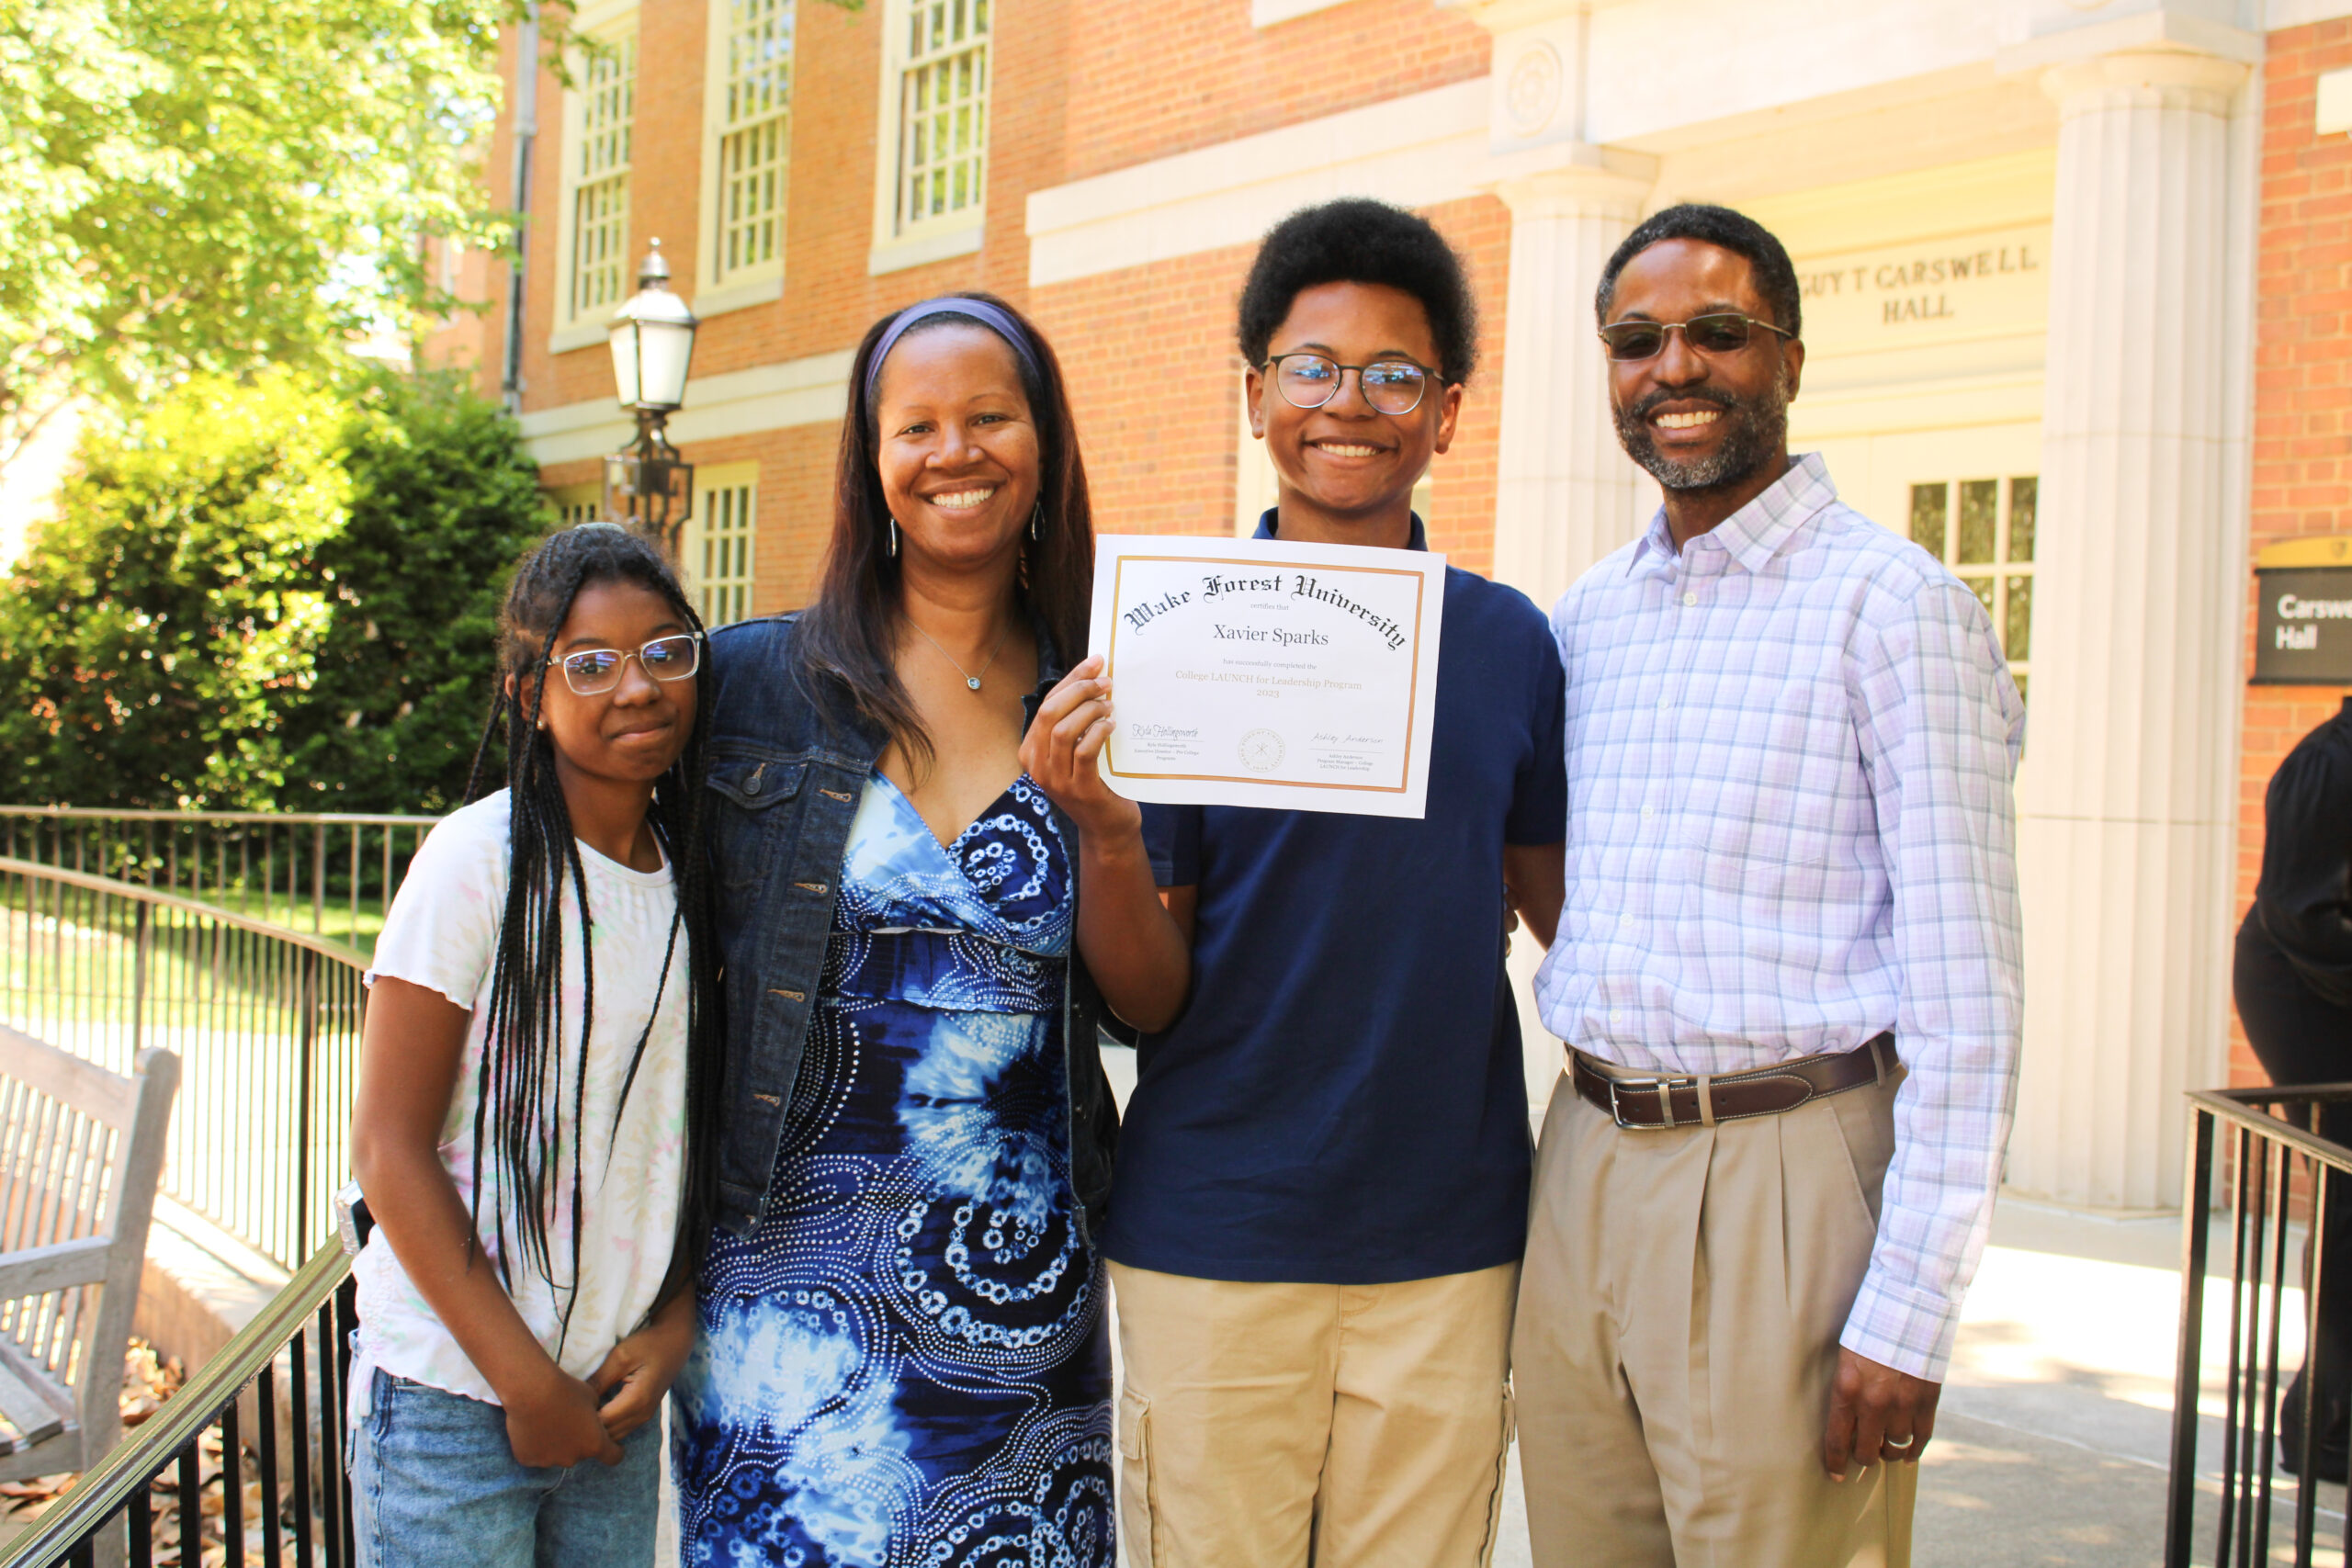 A family of four stands together. The teenage son is holding a certificate for completing a college prep program.